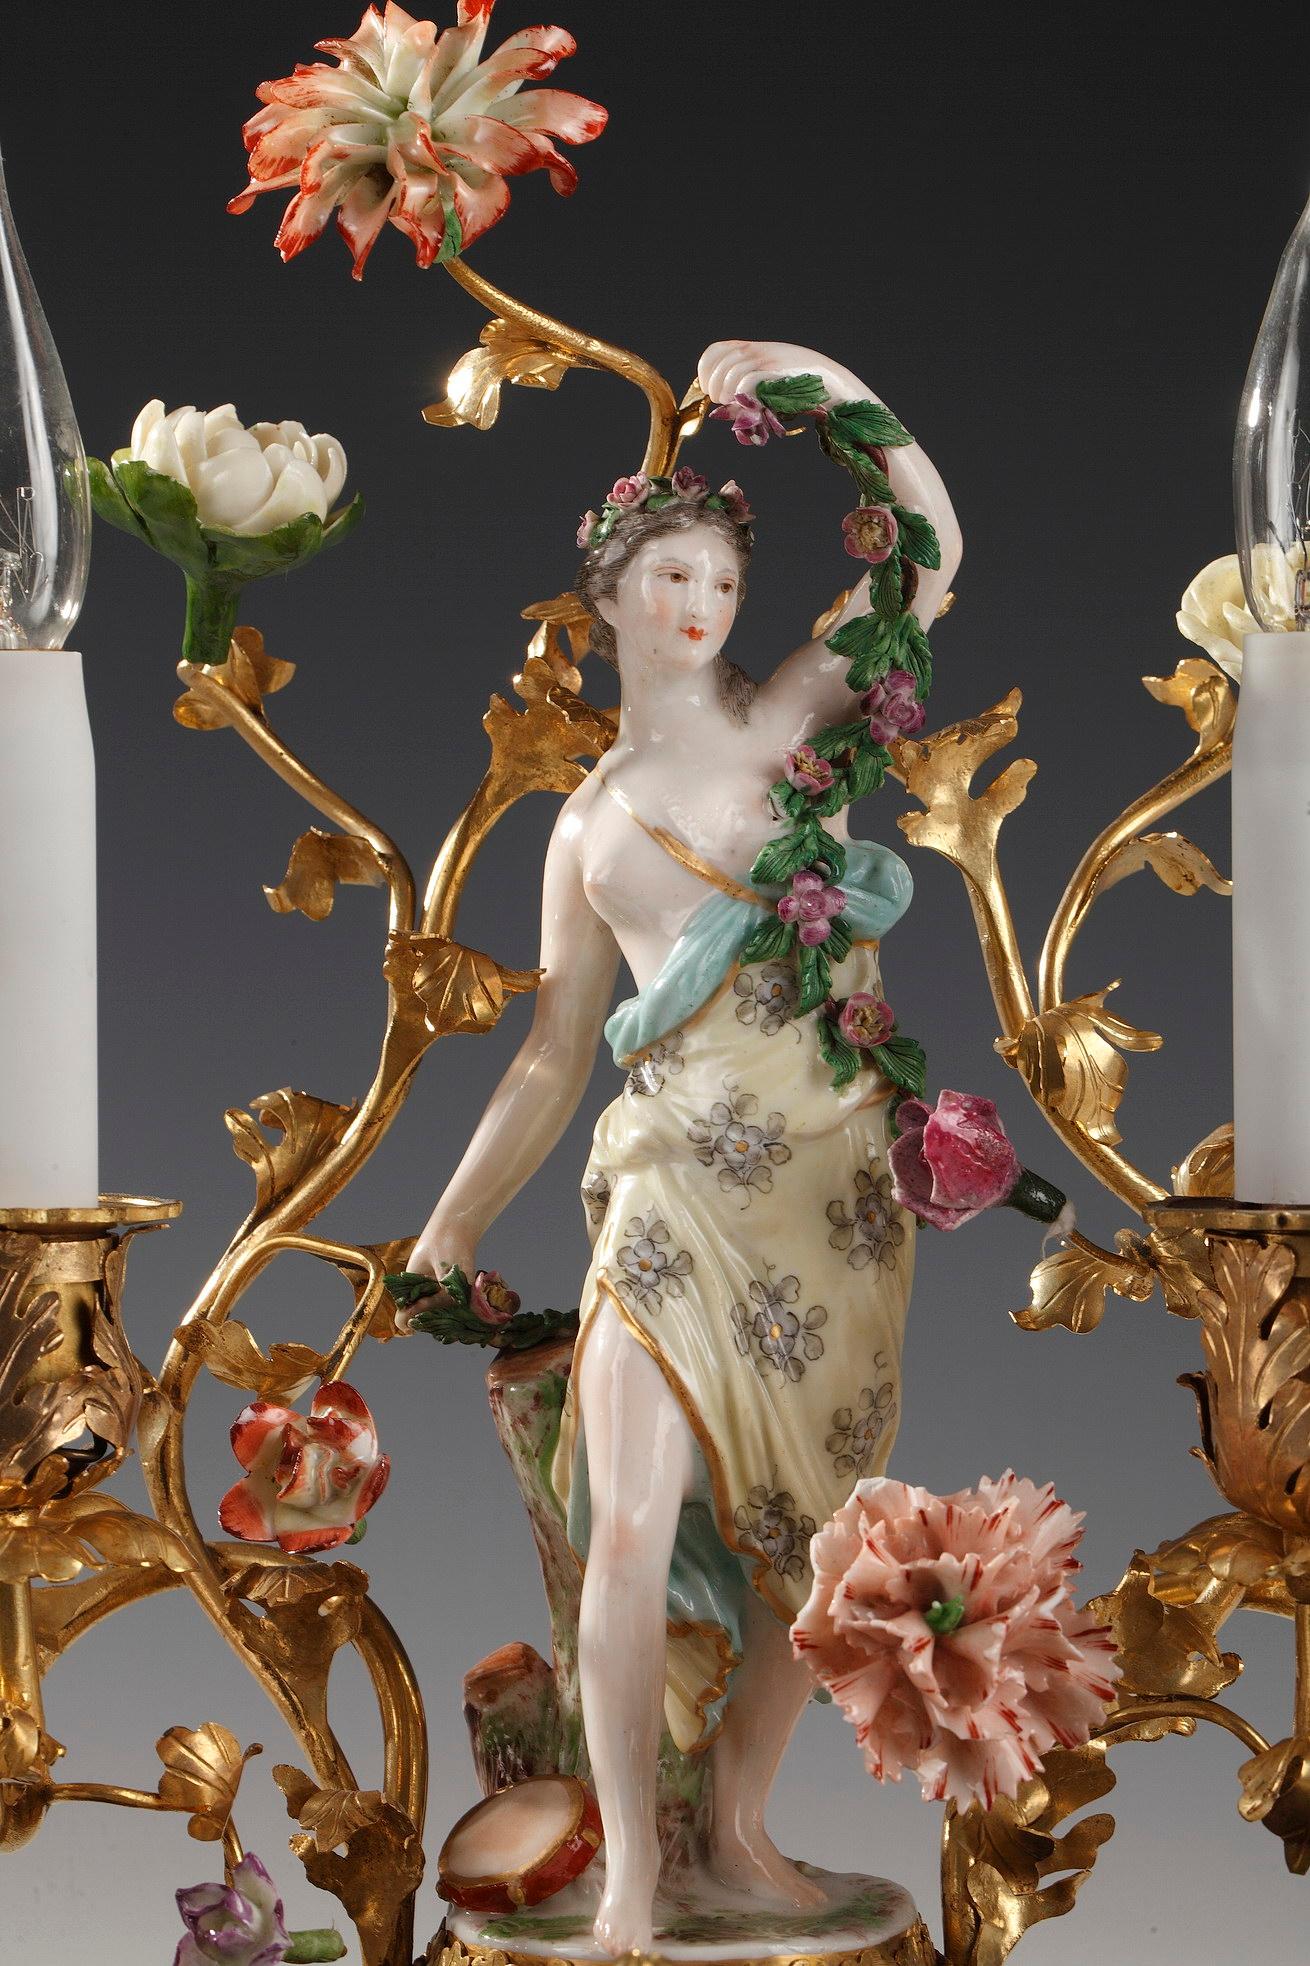 Charming Louis XV style polychrome porcelain and gilded bronze inkwell attributed to L'Escalier de crystal, with a muse holding a garland of flowers, on both sides two covered cups, in the center a receptacle with an openwork top, the whole framed